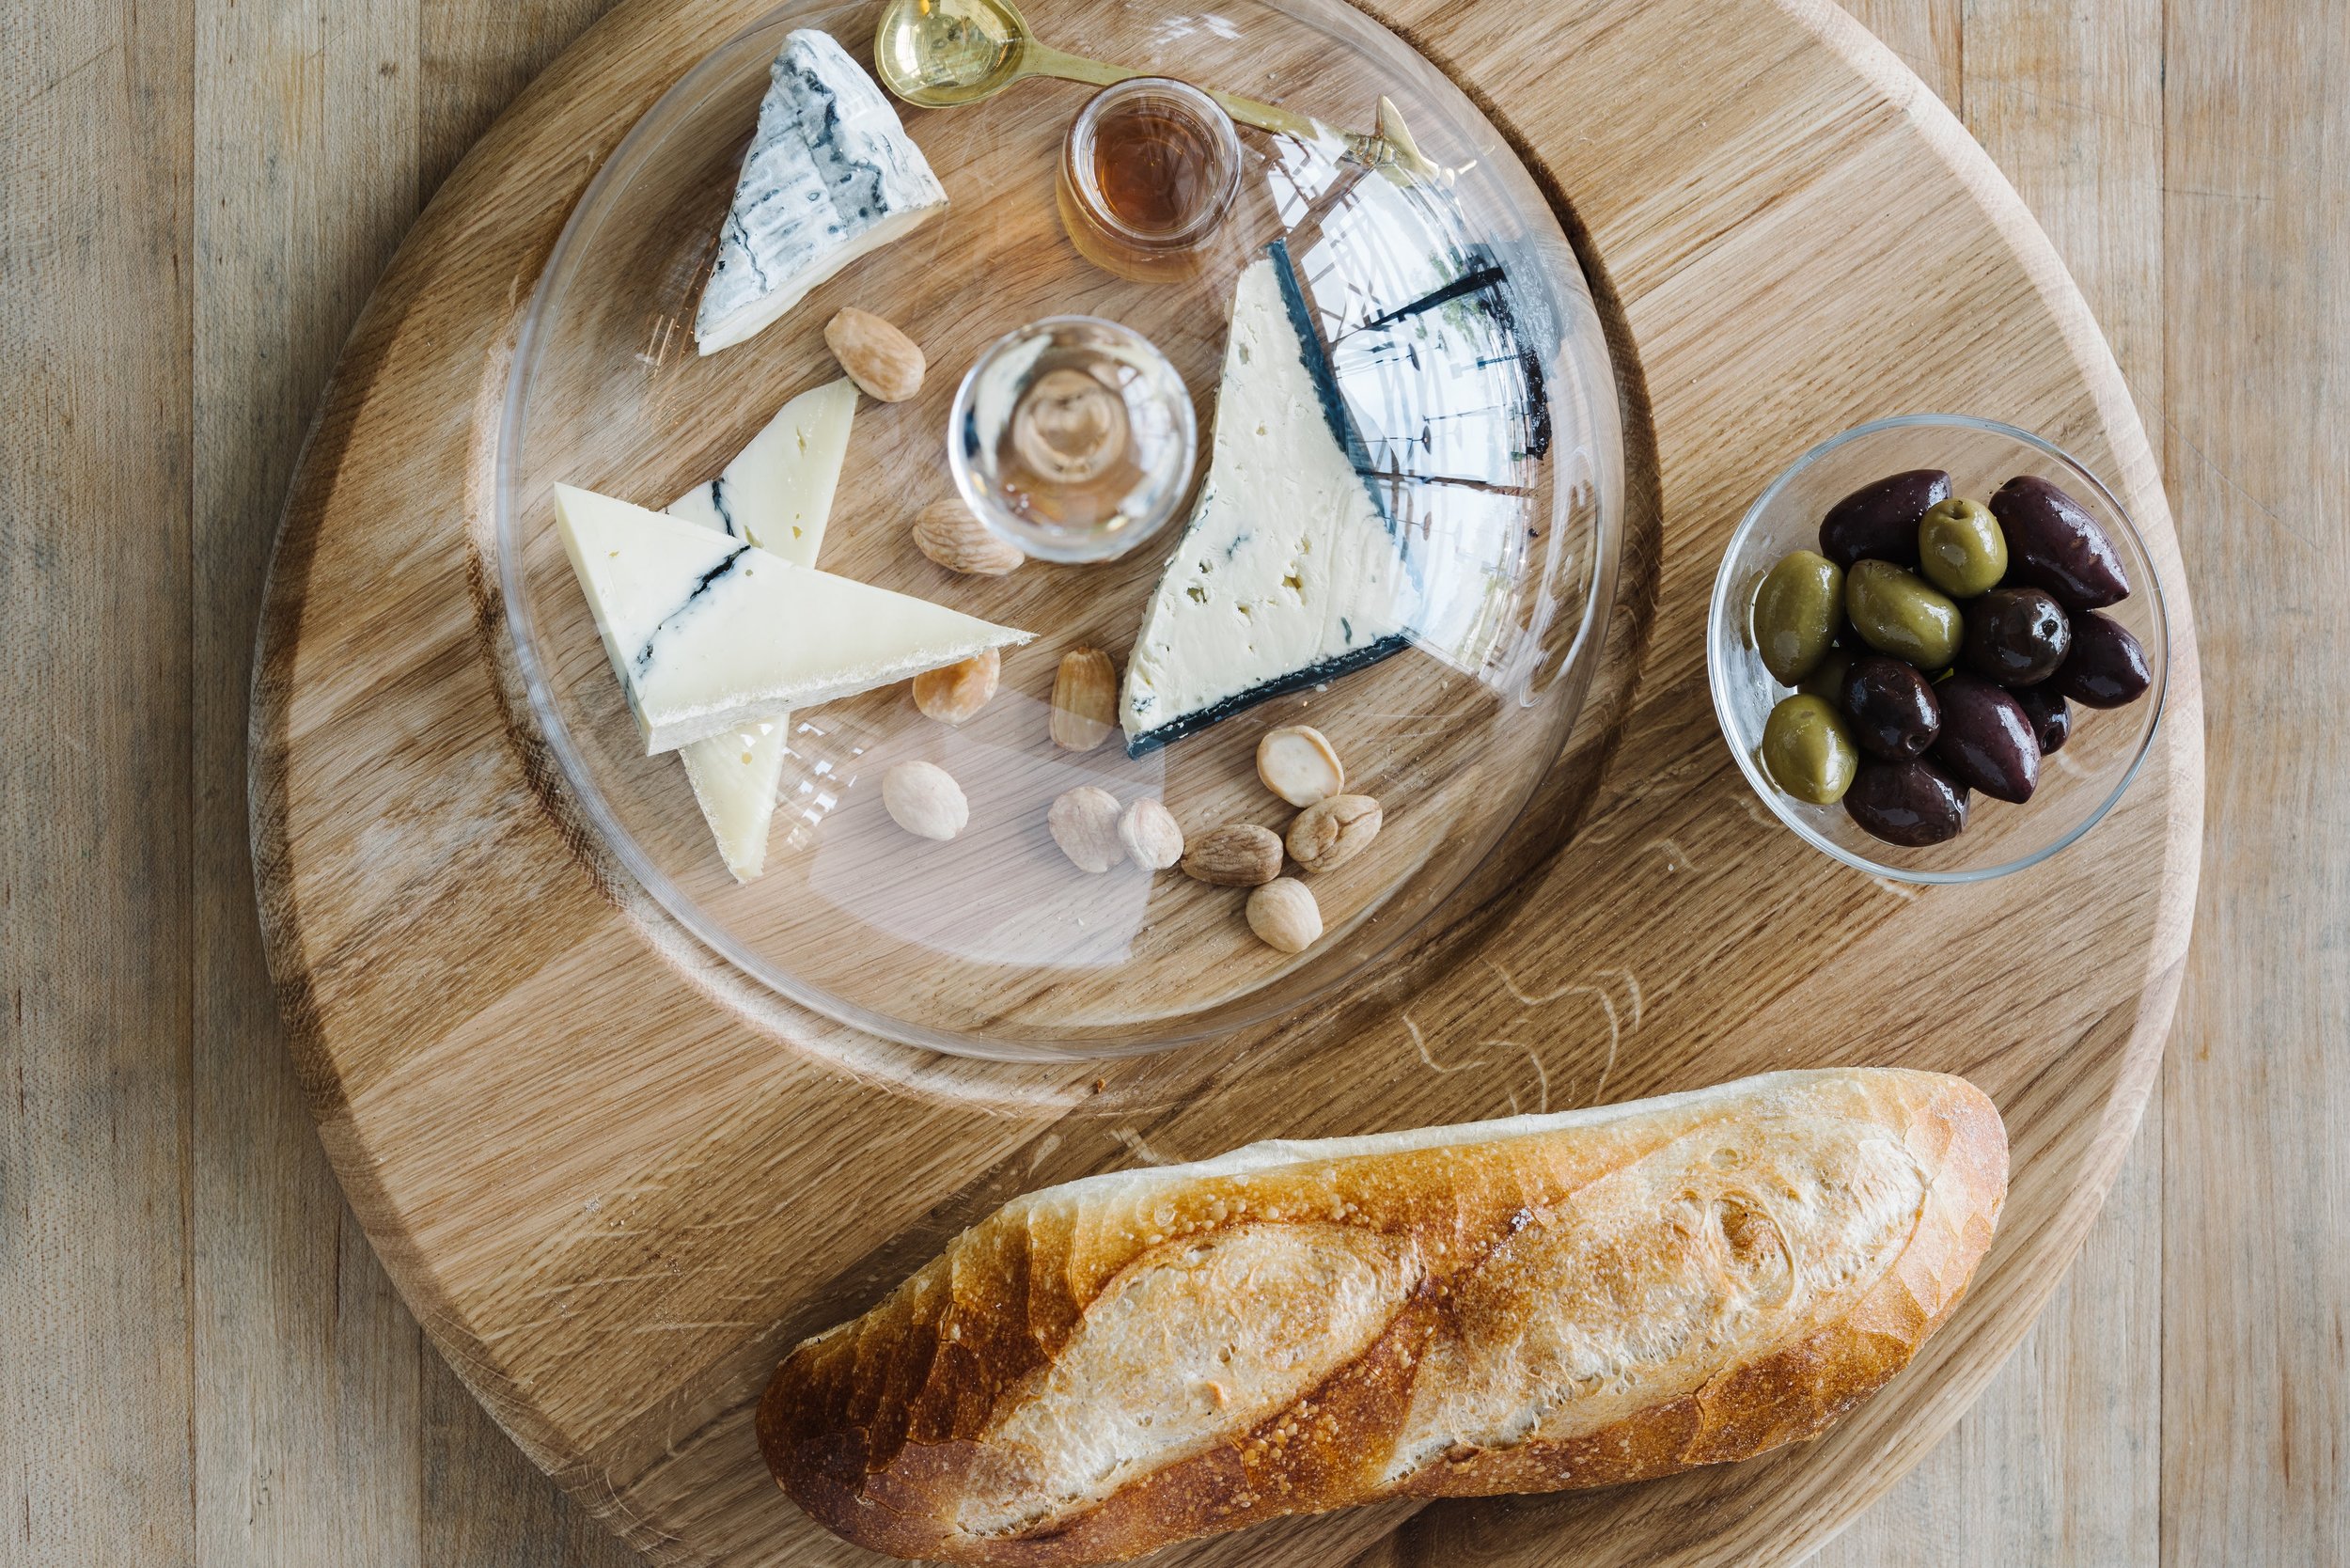 Cheese, olives, and baguette on round wood board